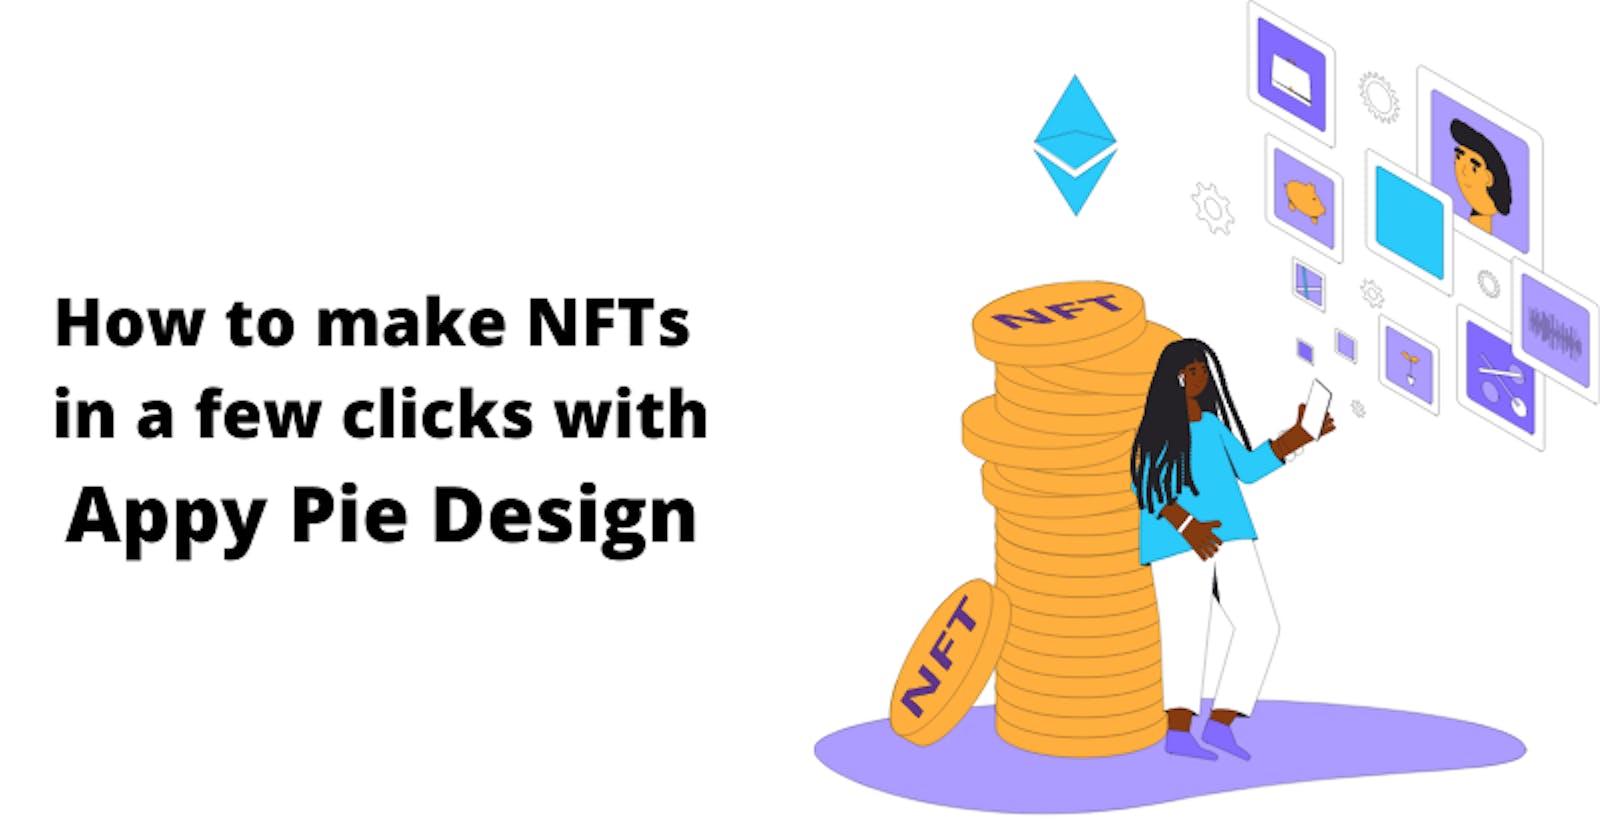 How to make NFTs in a few clicks with Appy Pie Design?